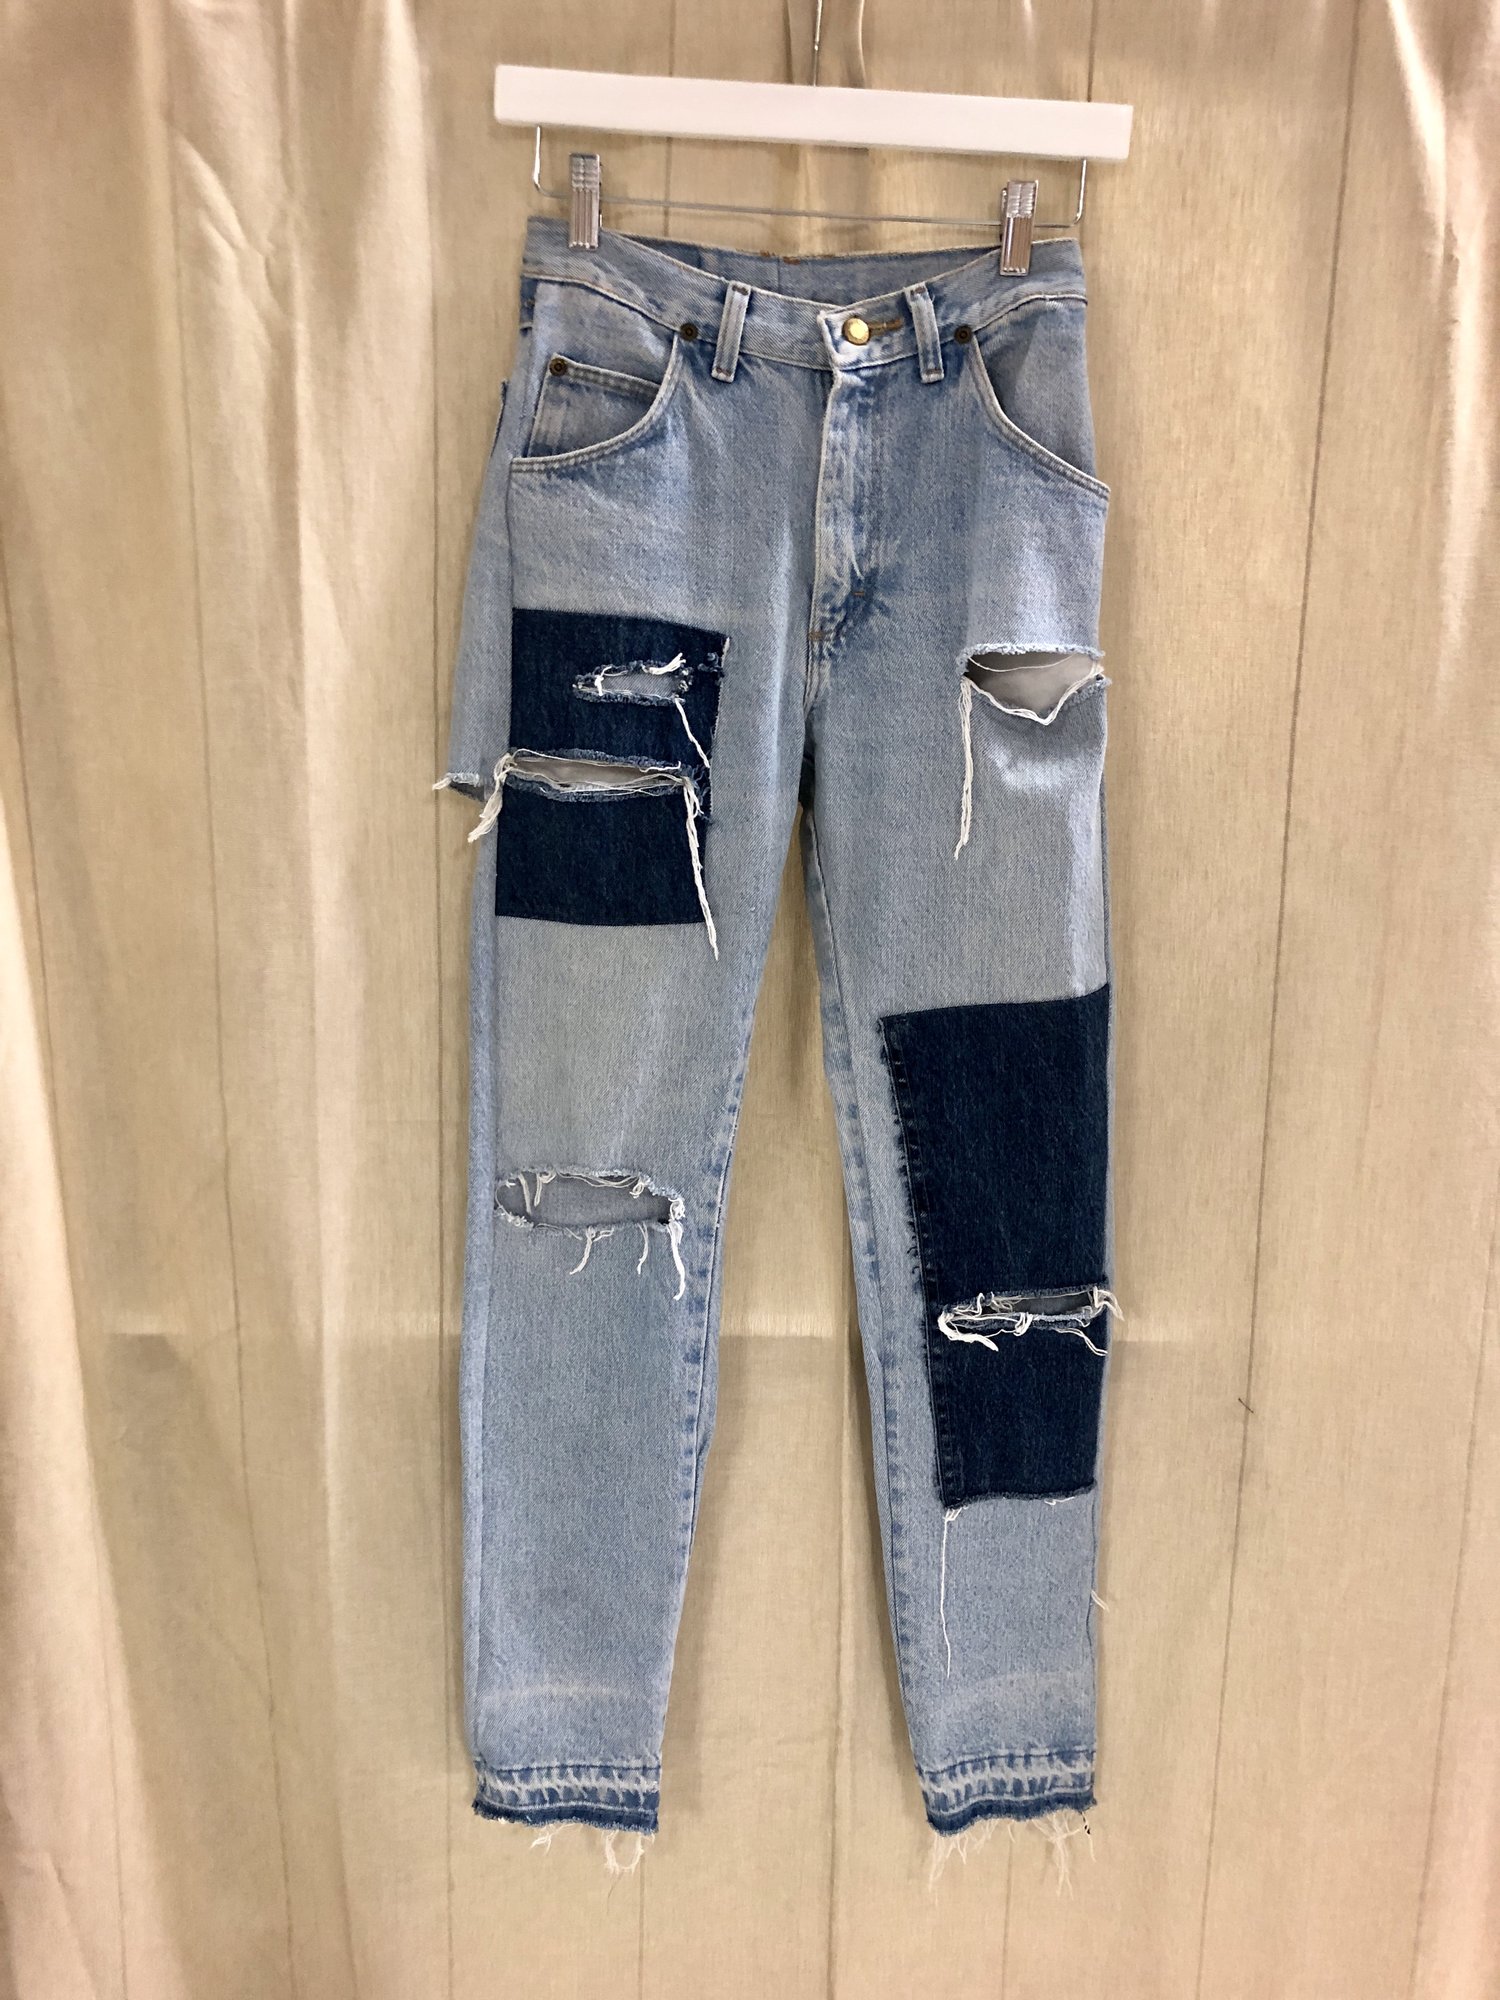 MONARCH PATCHED DENIM - Stitched Up